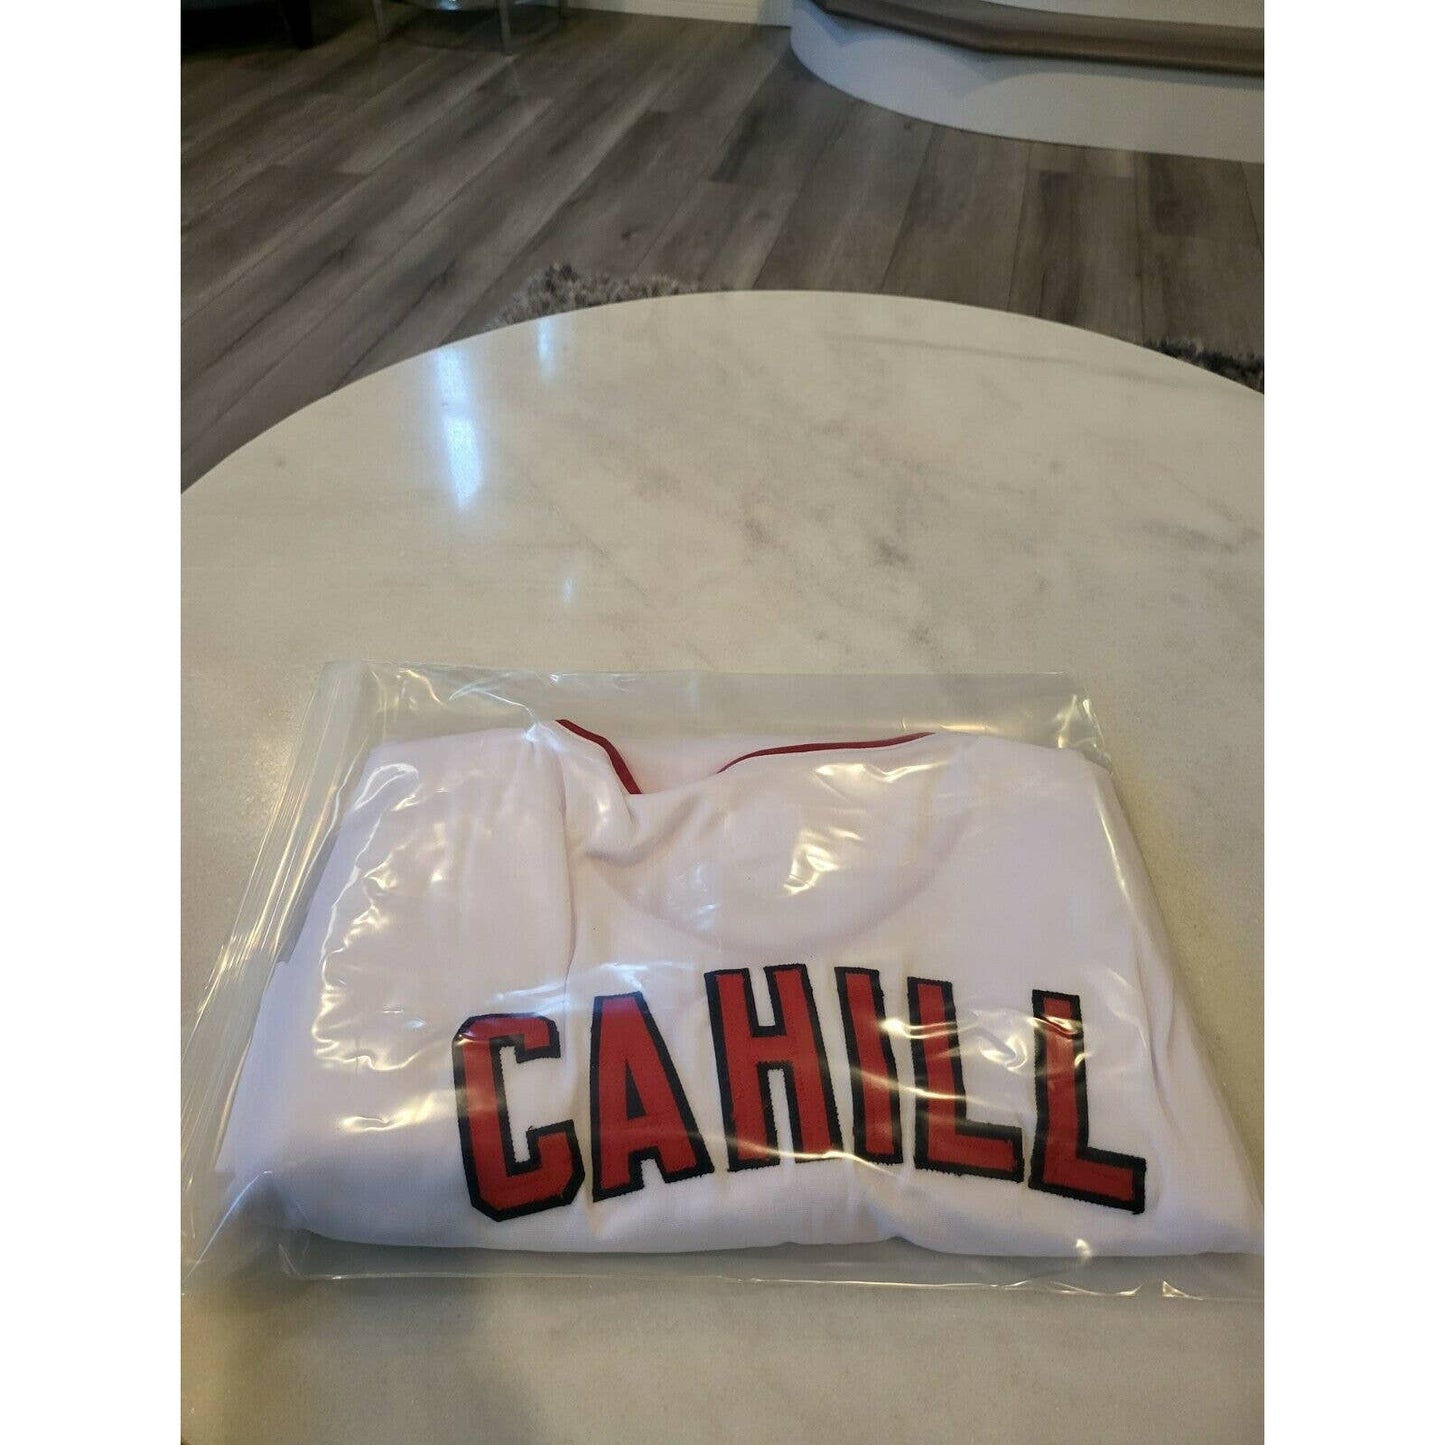 Trevor Cahill Autographed/Signed Jersey Sticker Los Angeles Angels - TreasuresEvolved